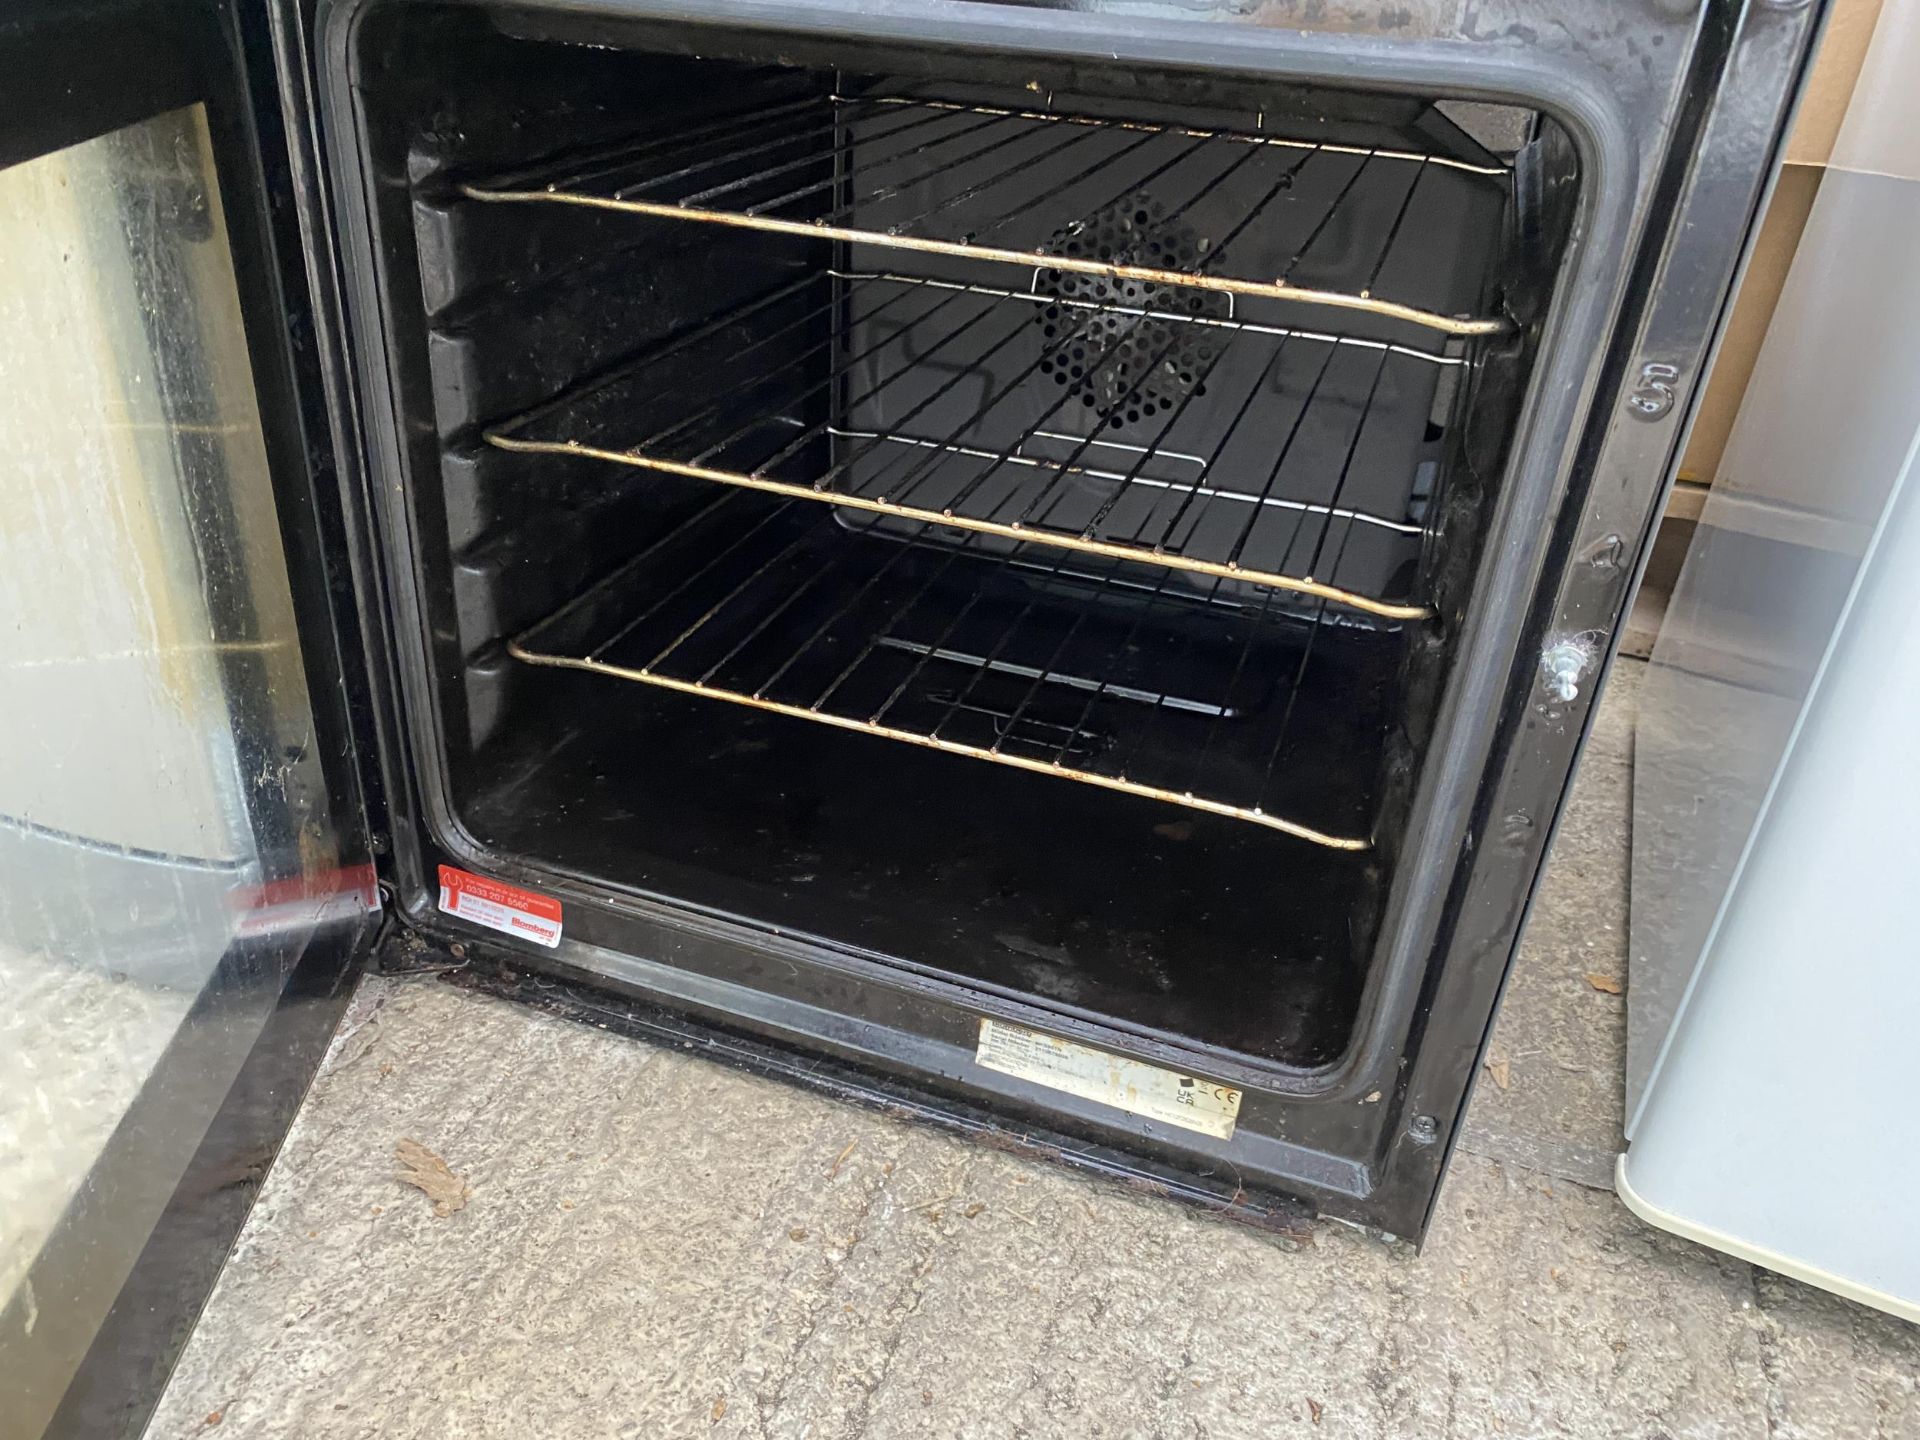 A BLACK BLOMBERG FREESTANDING ELECTRIC OVEN AND HOB - Image 4 of 5